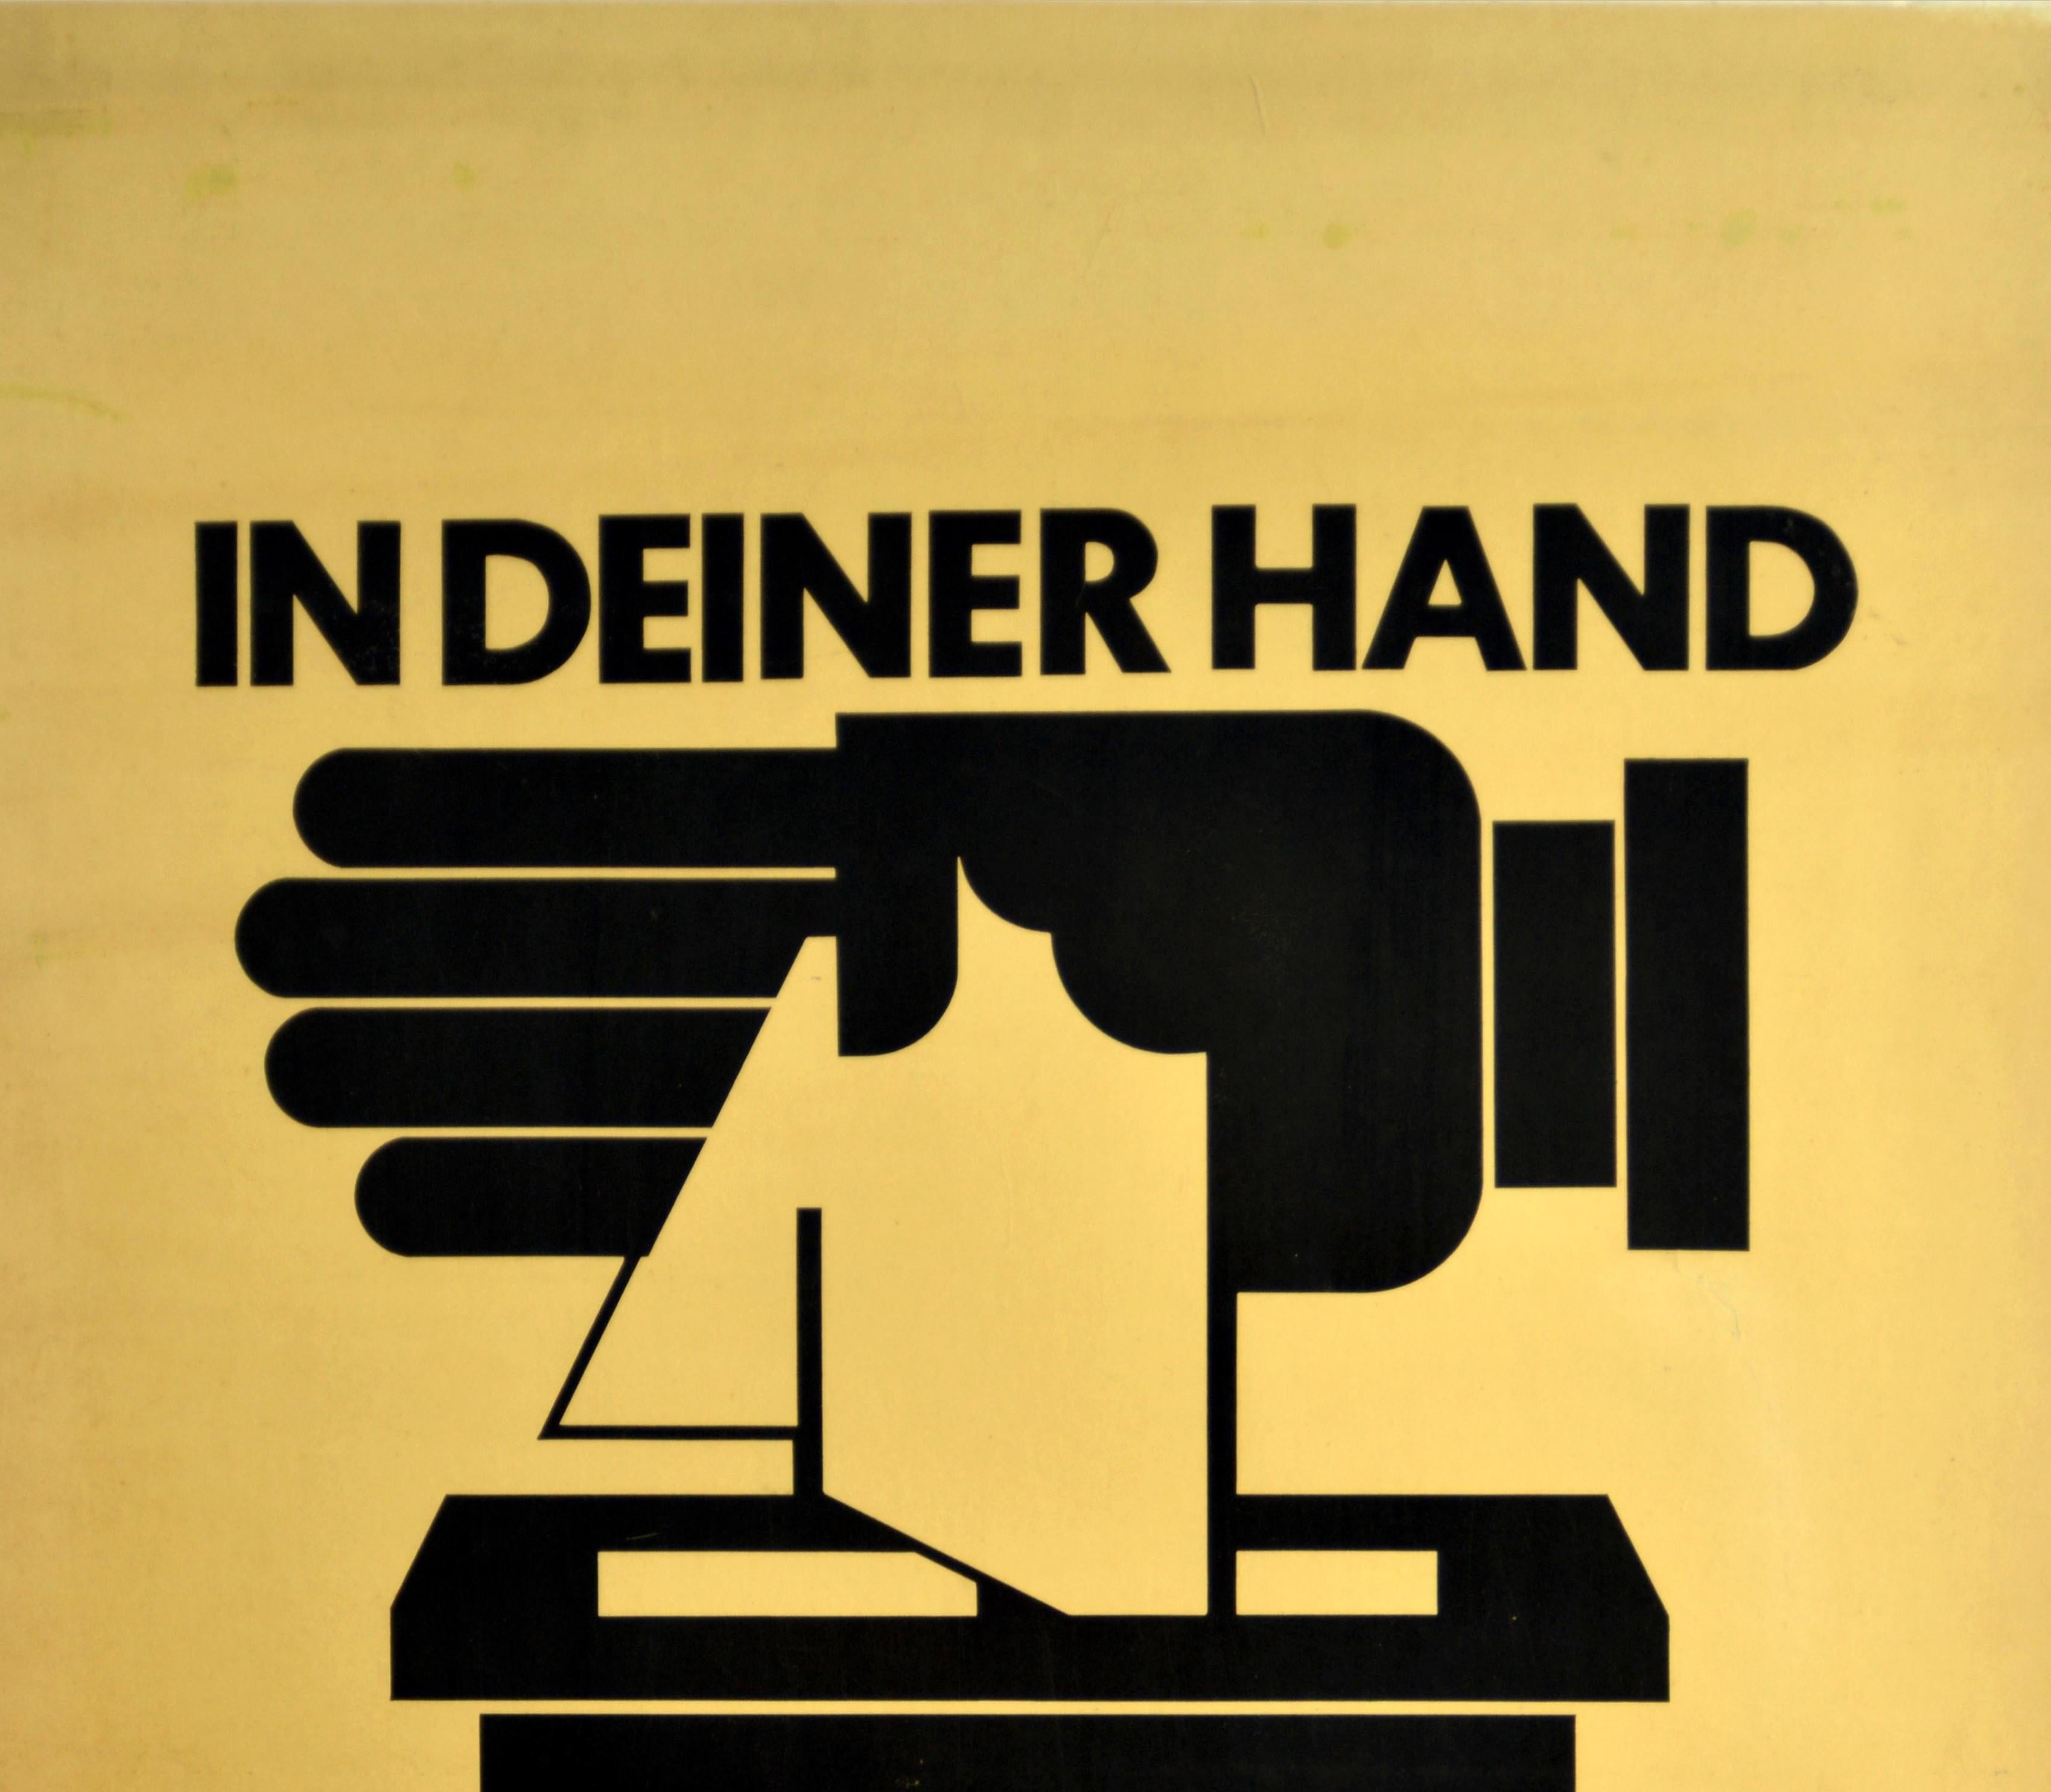 Original vintage hygiene and health propaganda poster - Cologne's Cleanliness In Your Hands / In Deiner Hand Kolns Sauberkeit - featuring a great Bauhaus style graphic design of a hand dropping a tissue in a rubbish bin with the bold black lettering